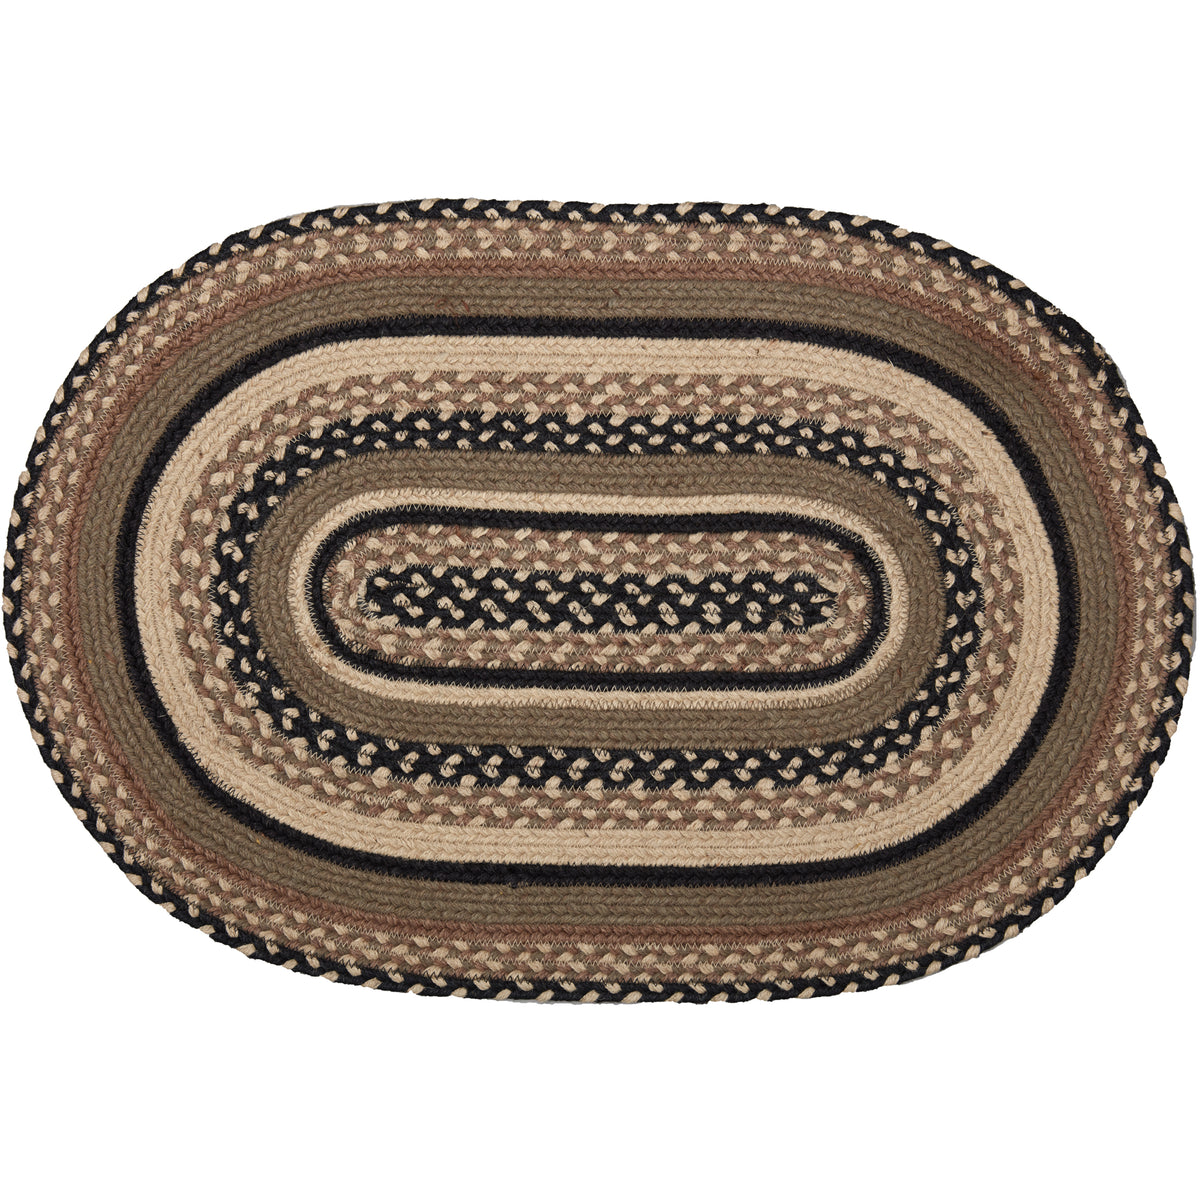 April & Olive Sawyer Mill Charcoal Creme Jute Rug Oval w/ Pad 20x30 By VHC Brands